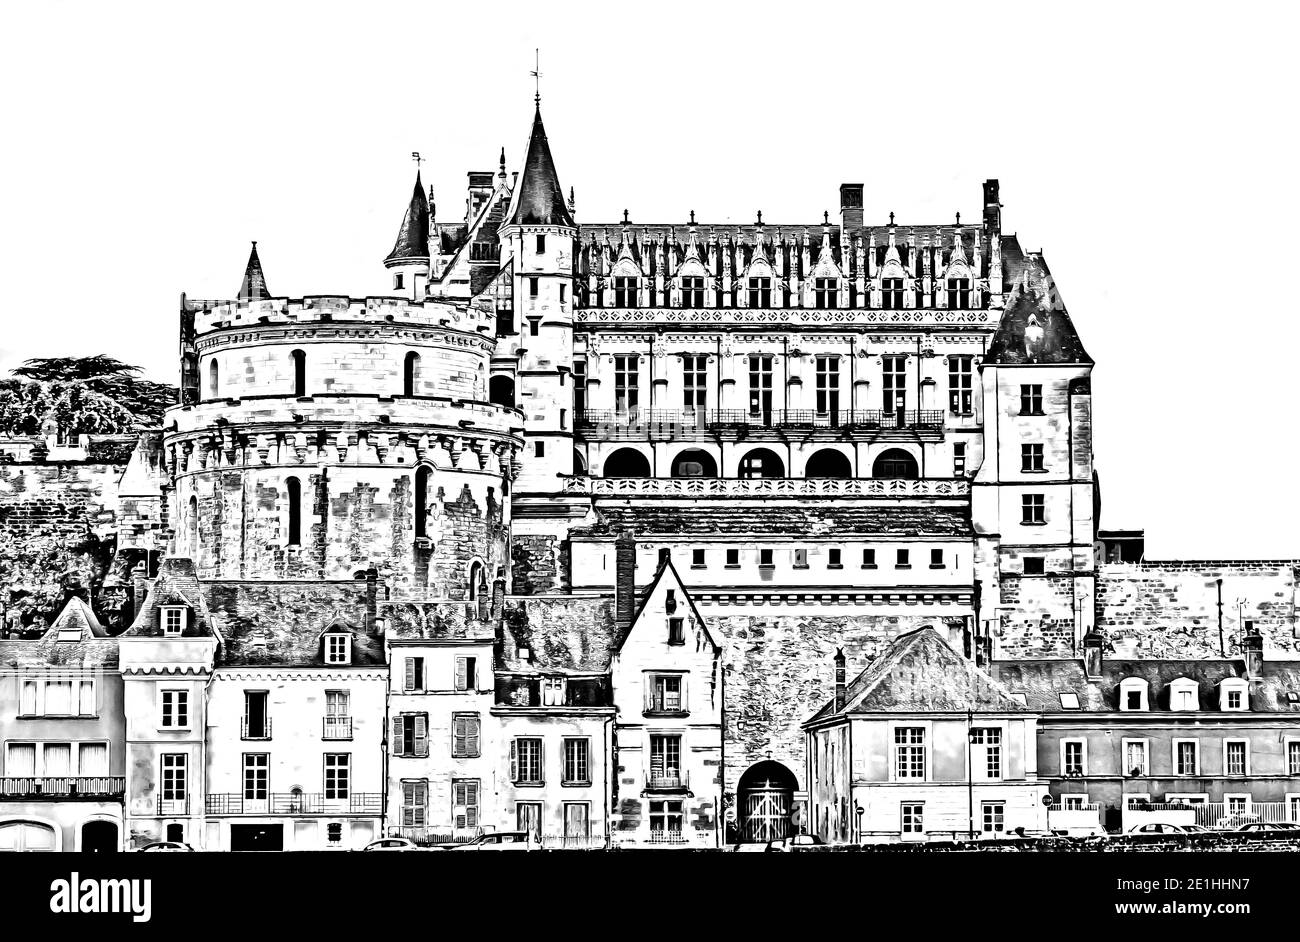 Amboise Castle in Loire Valley, Touraine region, France - vintage painted style illustration series, pencil drawing style. Stock Photo